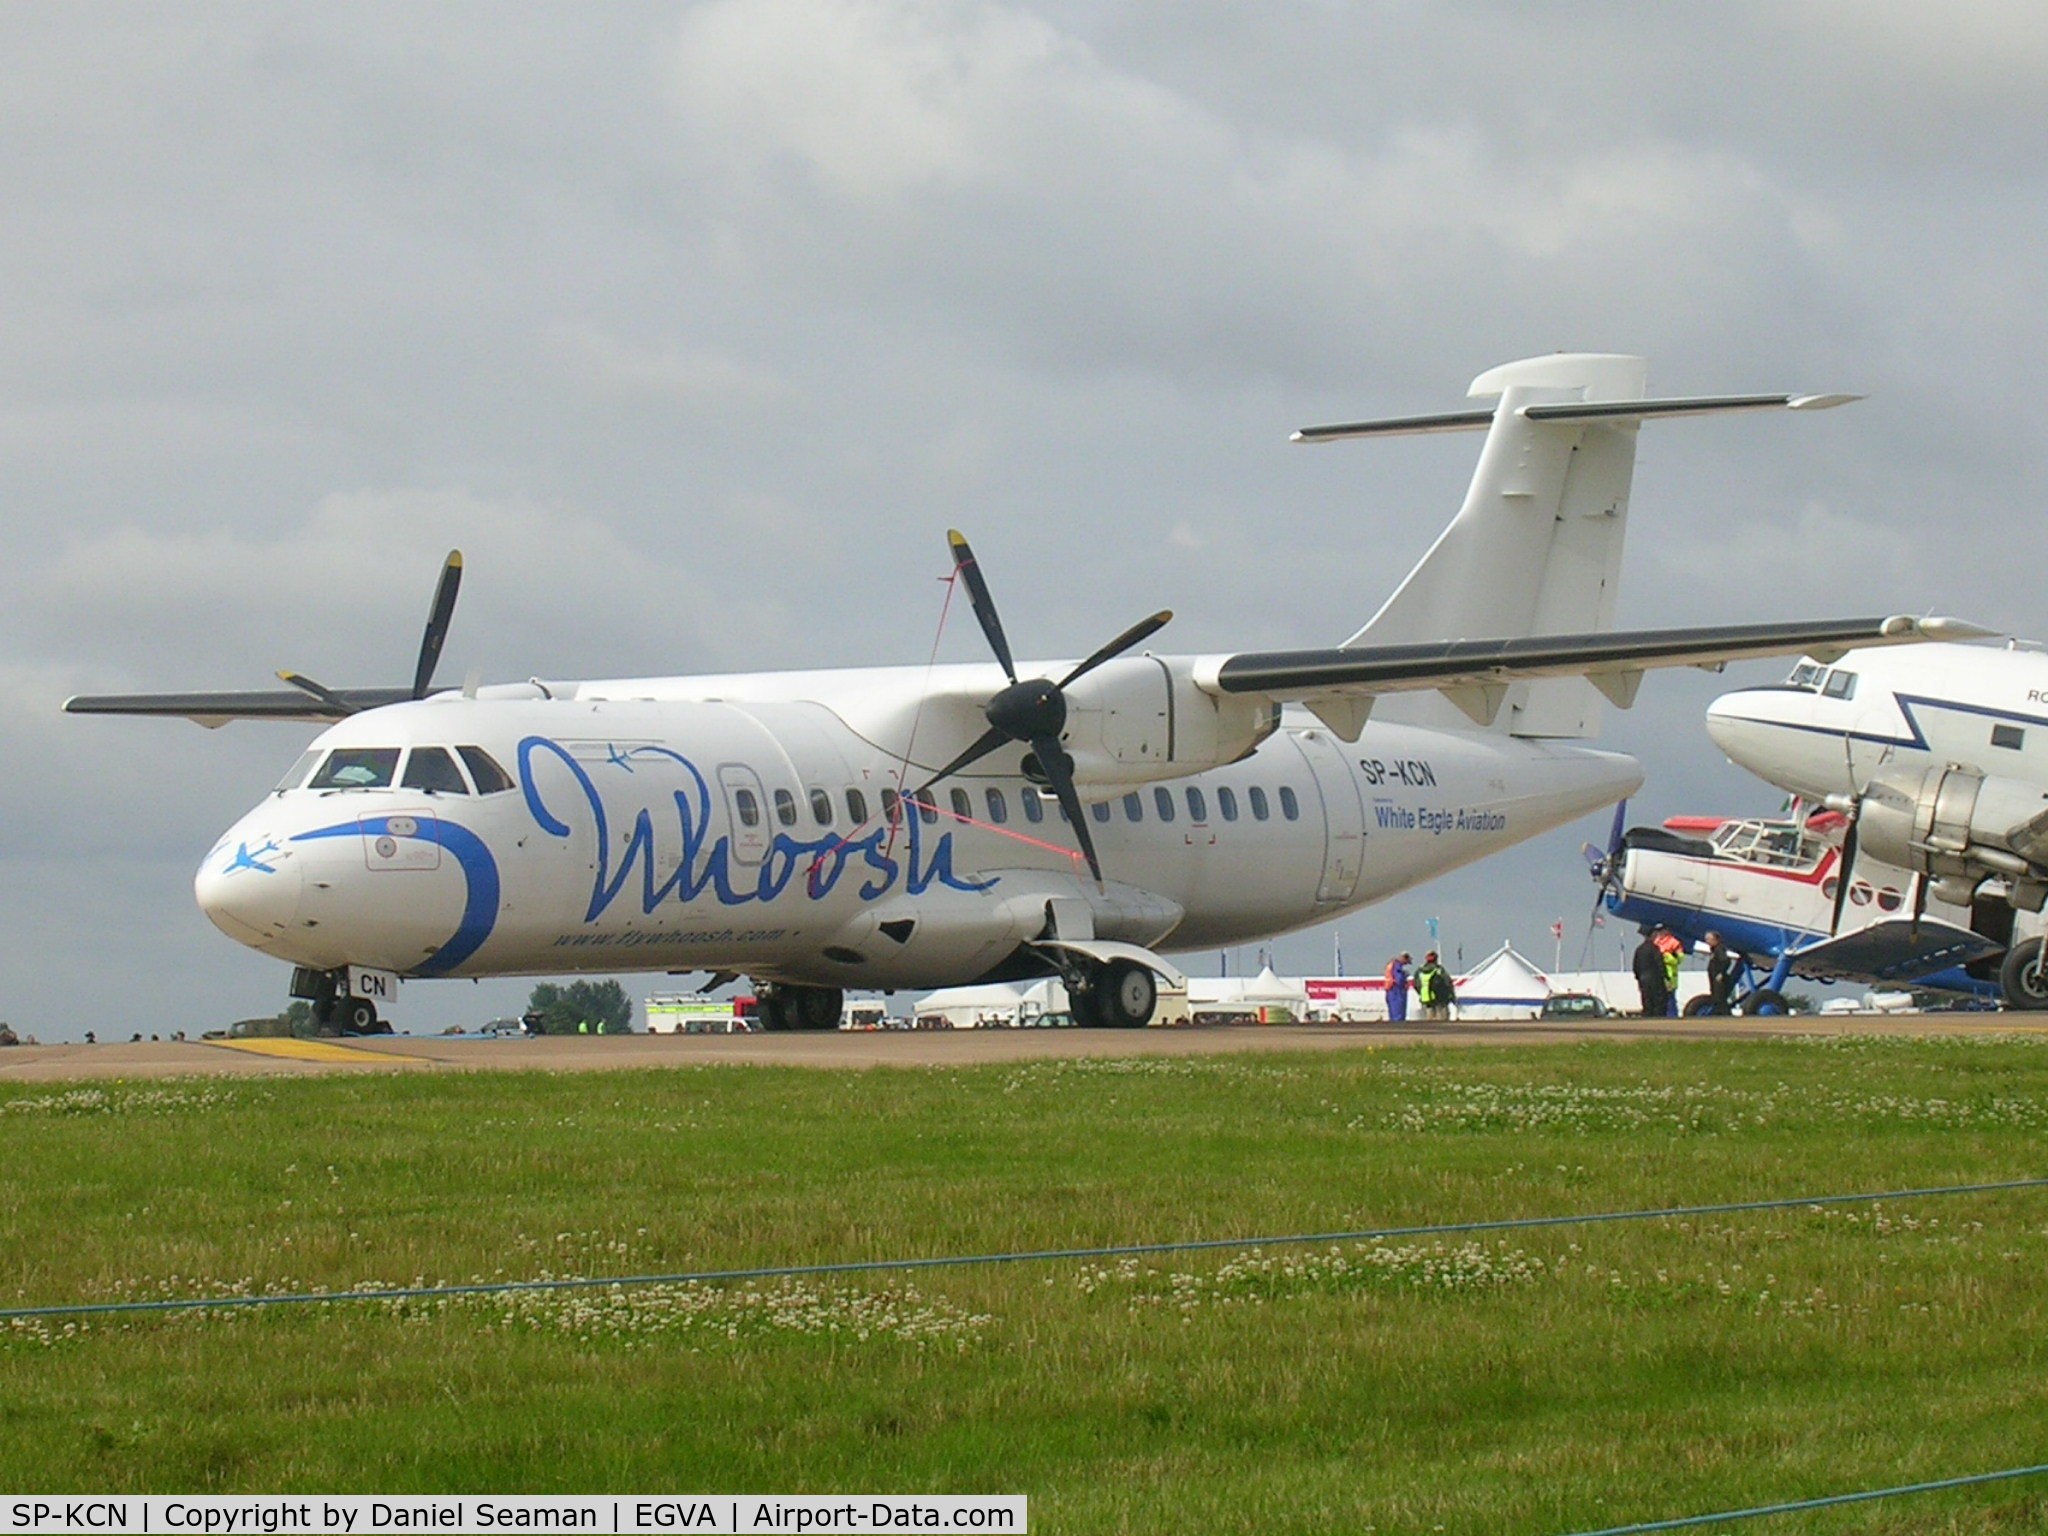 SP-KCN, 1995 ATR 42-320 C/N 409, a charter for riat07